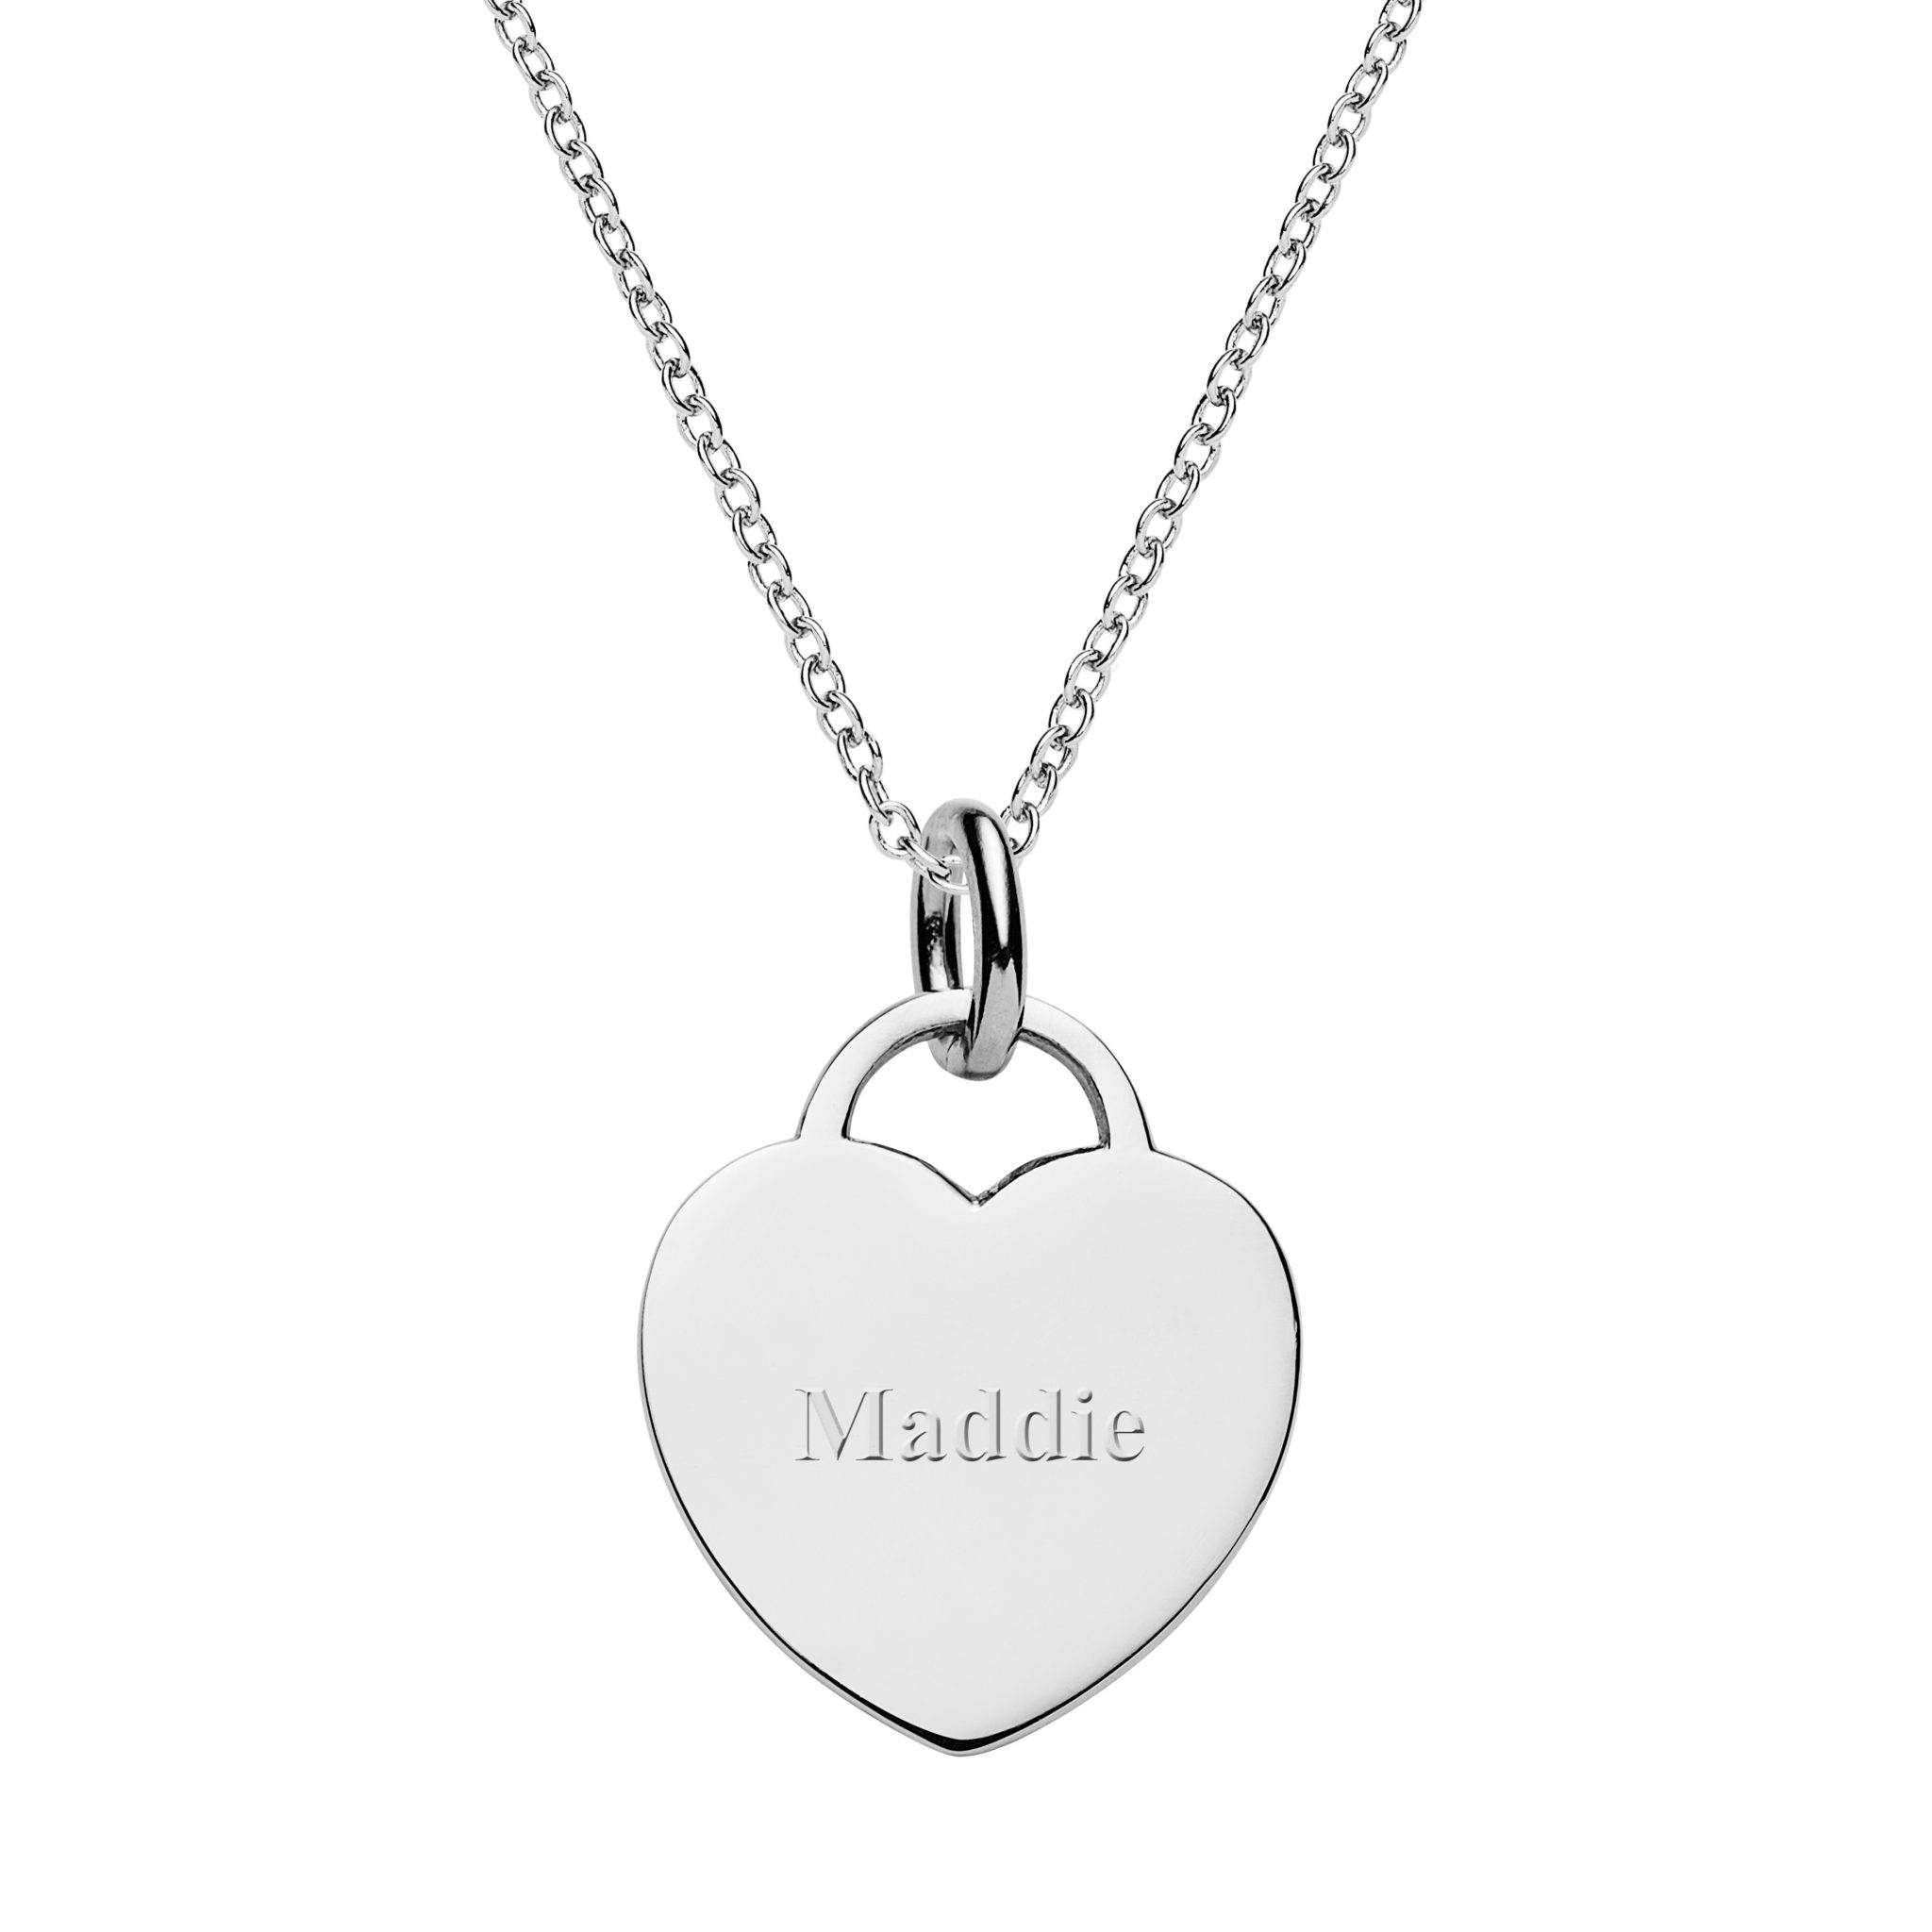 engraved silver hear tag necklace